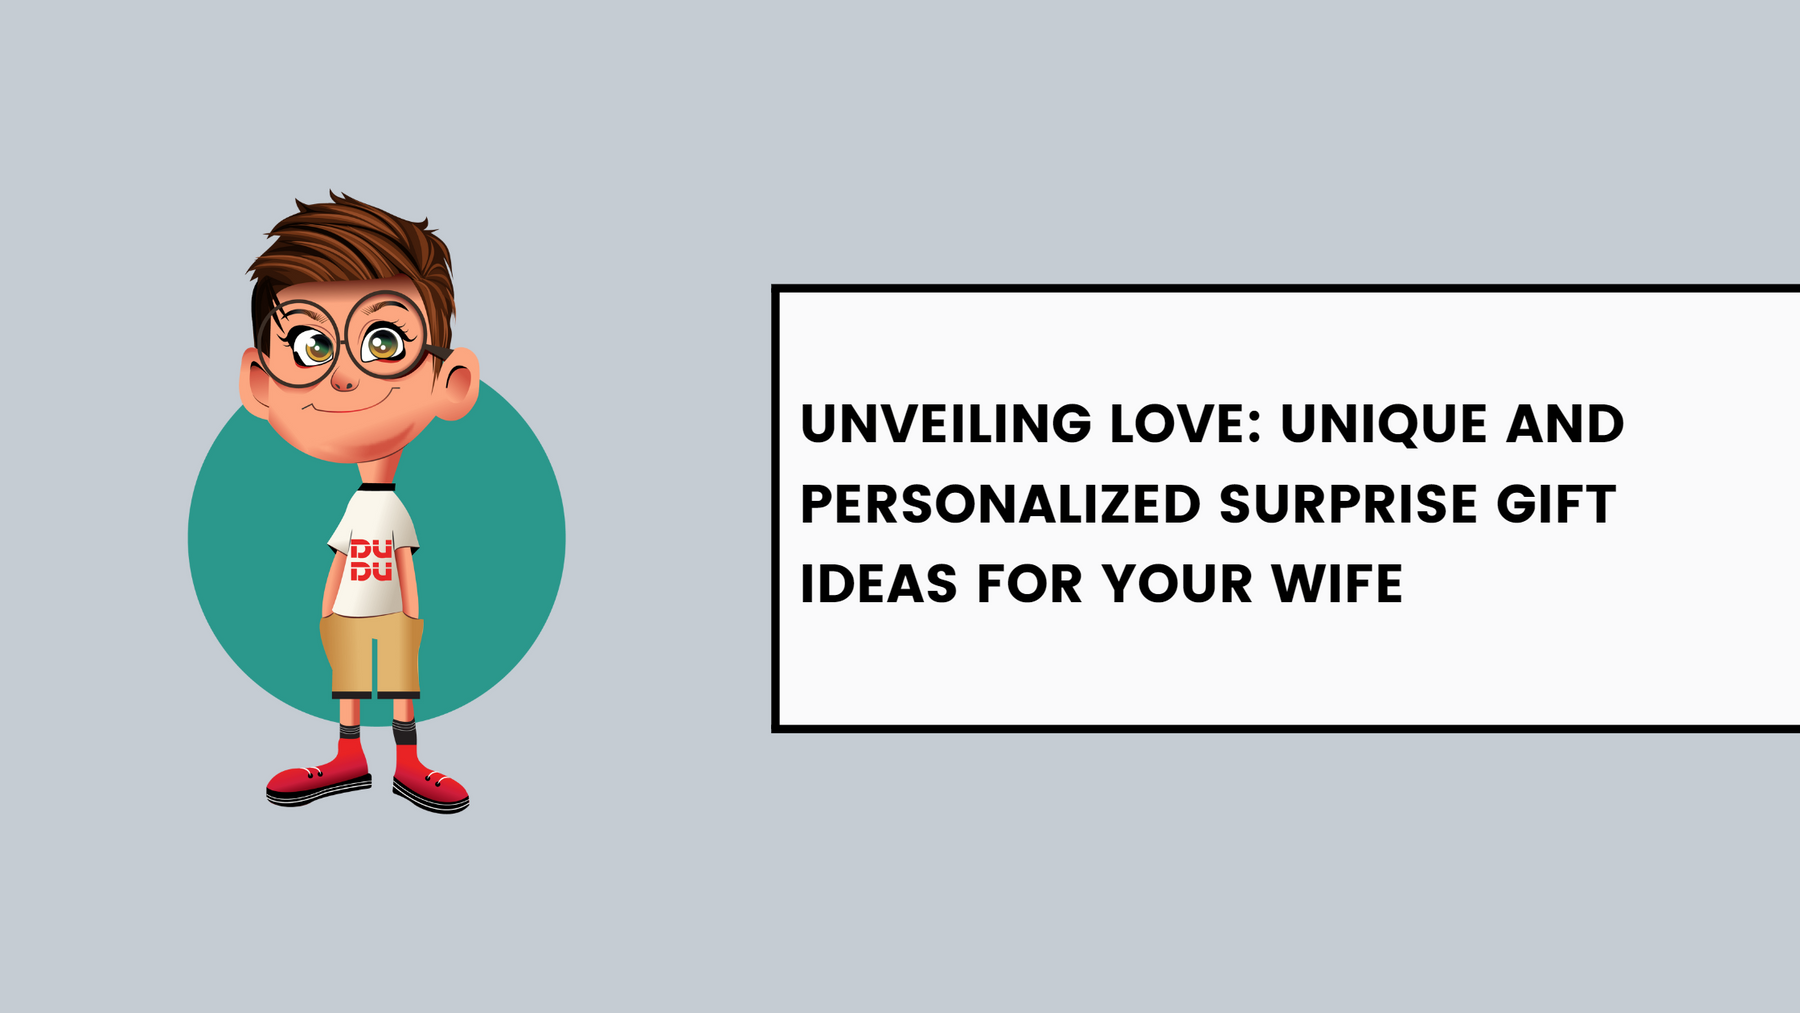 Unveiling Love: Unique and Personalized Surprise Gift Ideas for Your Wife